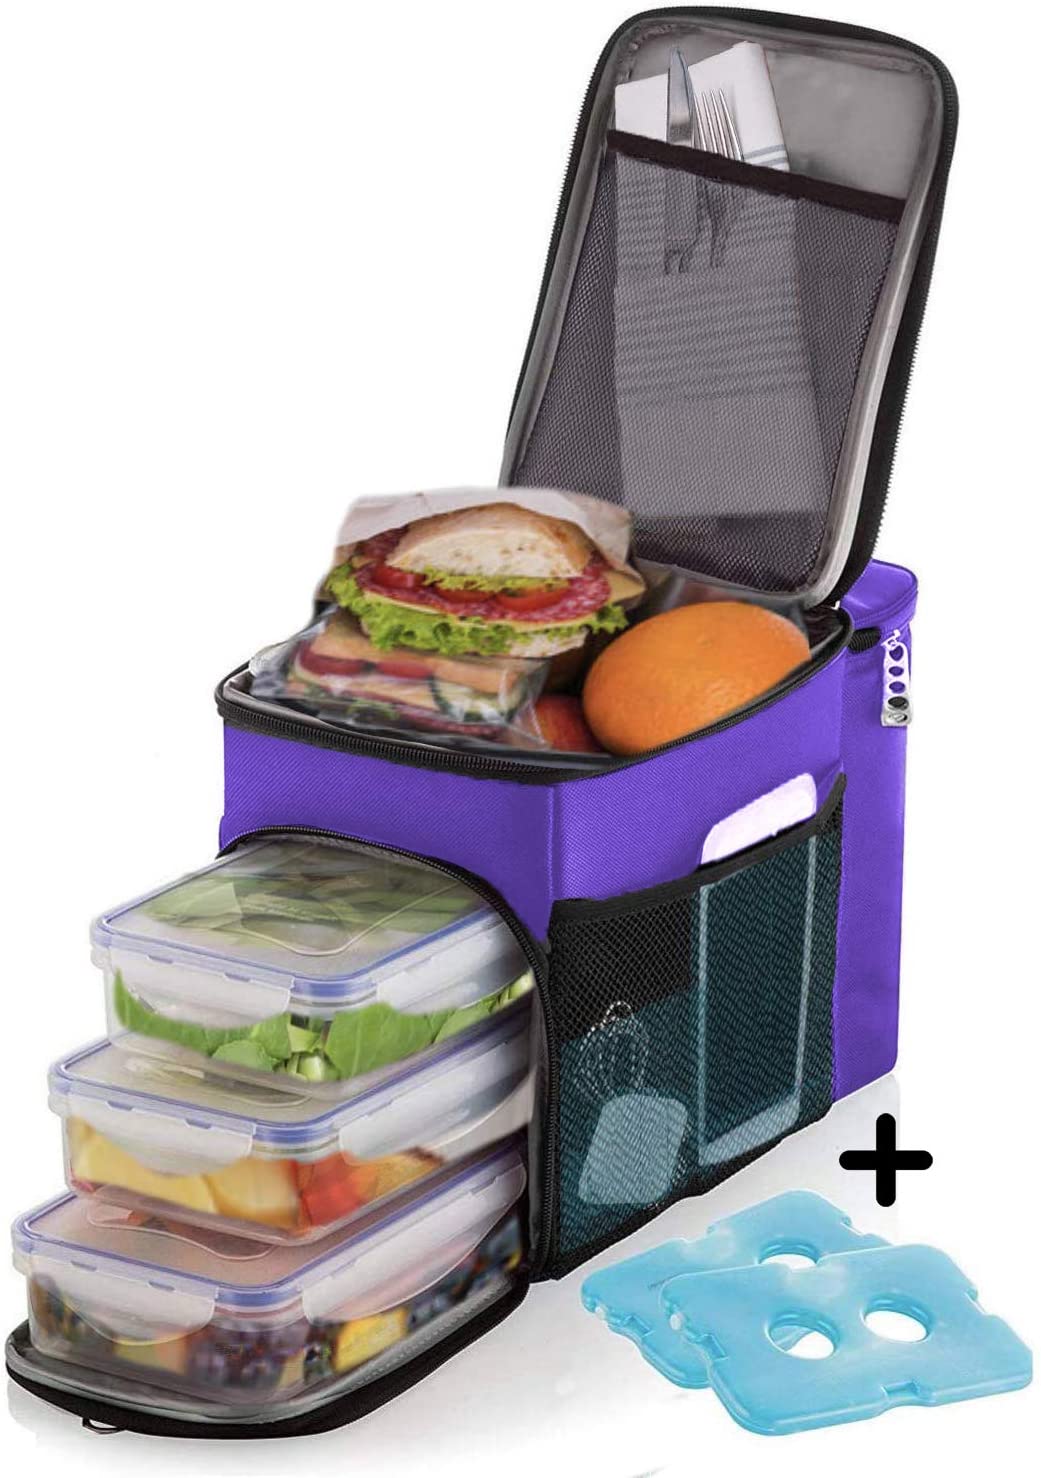 Container Travel Fruit Storage Pouch Snack Bag Lunch Box Lunch Bag Sandwich Box